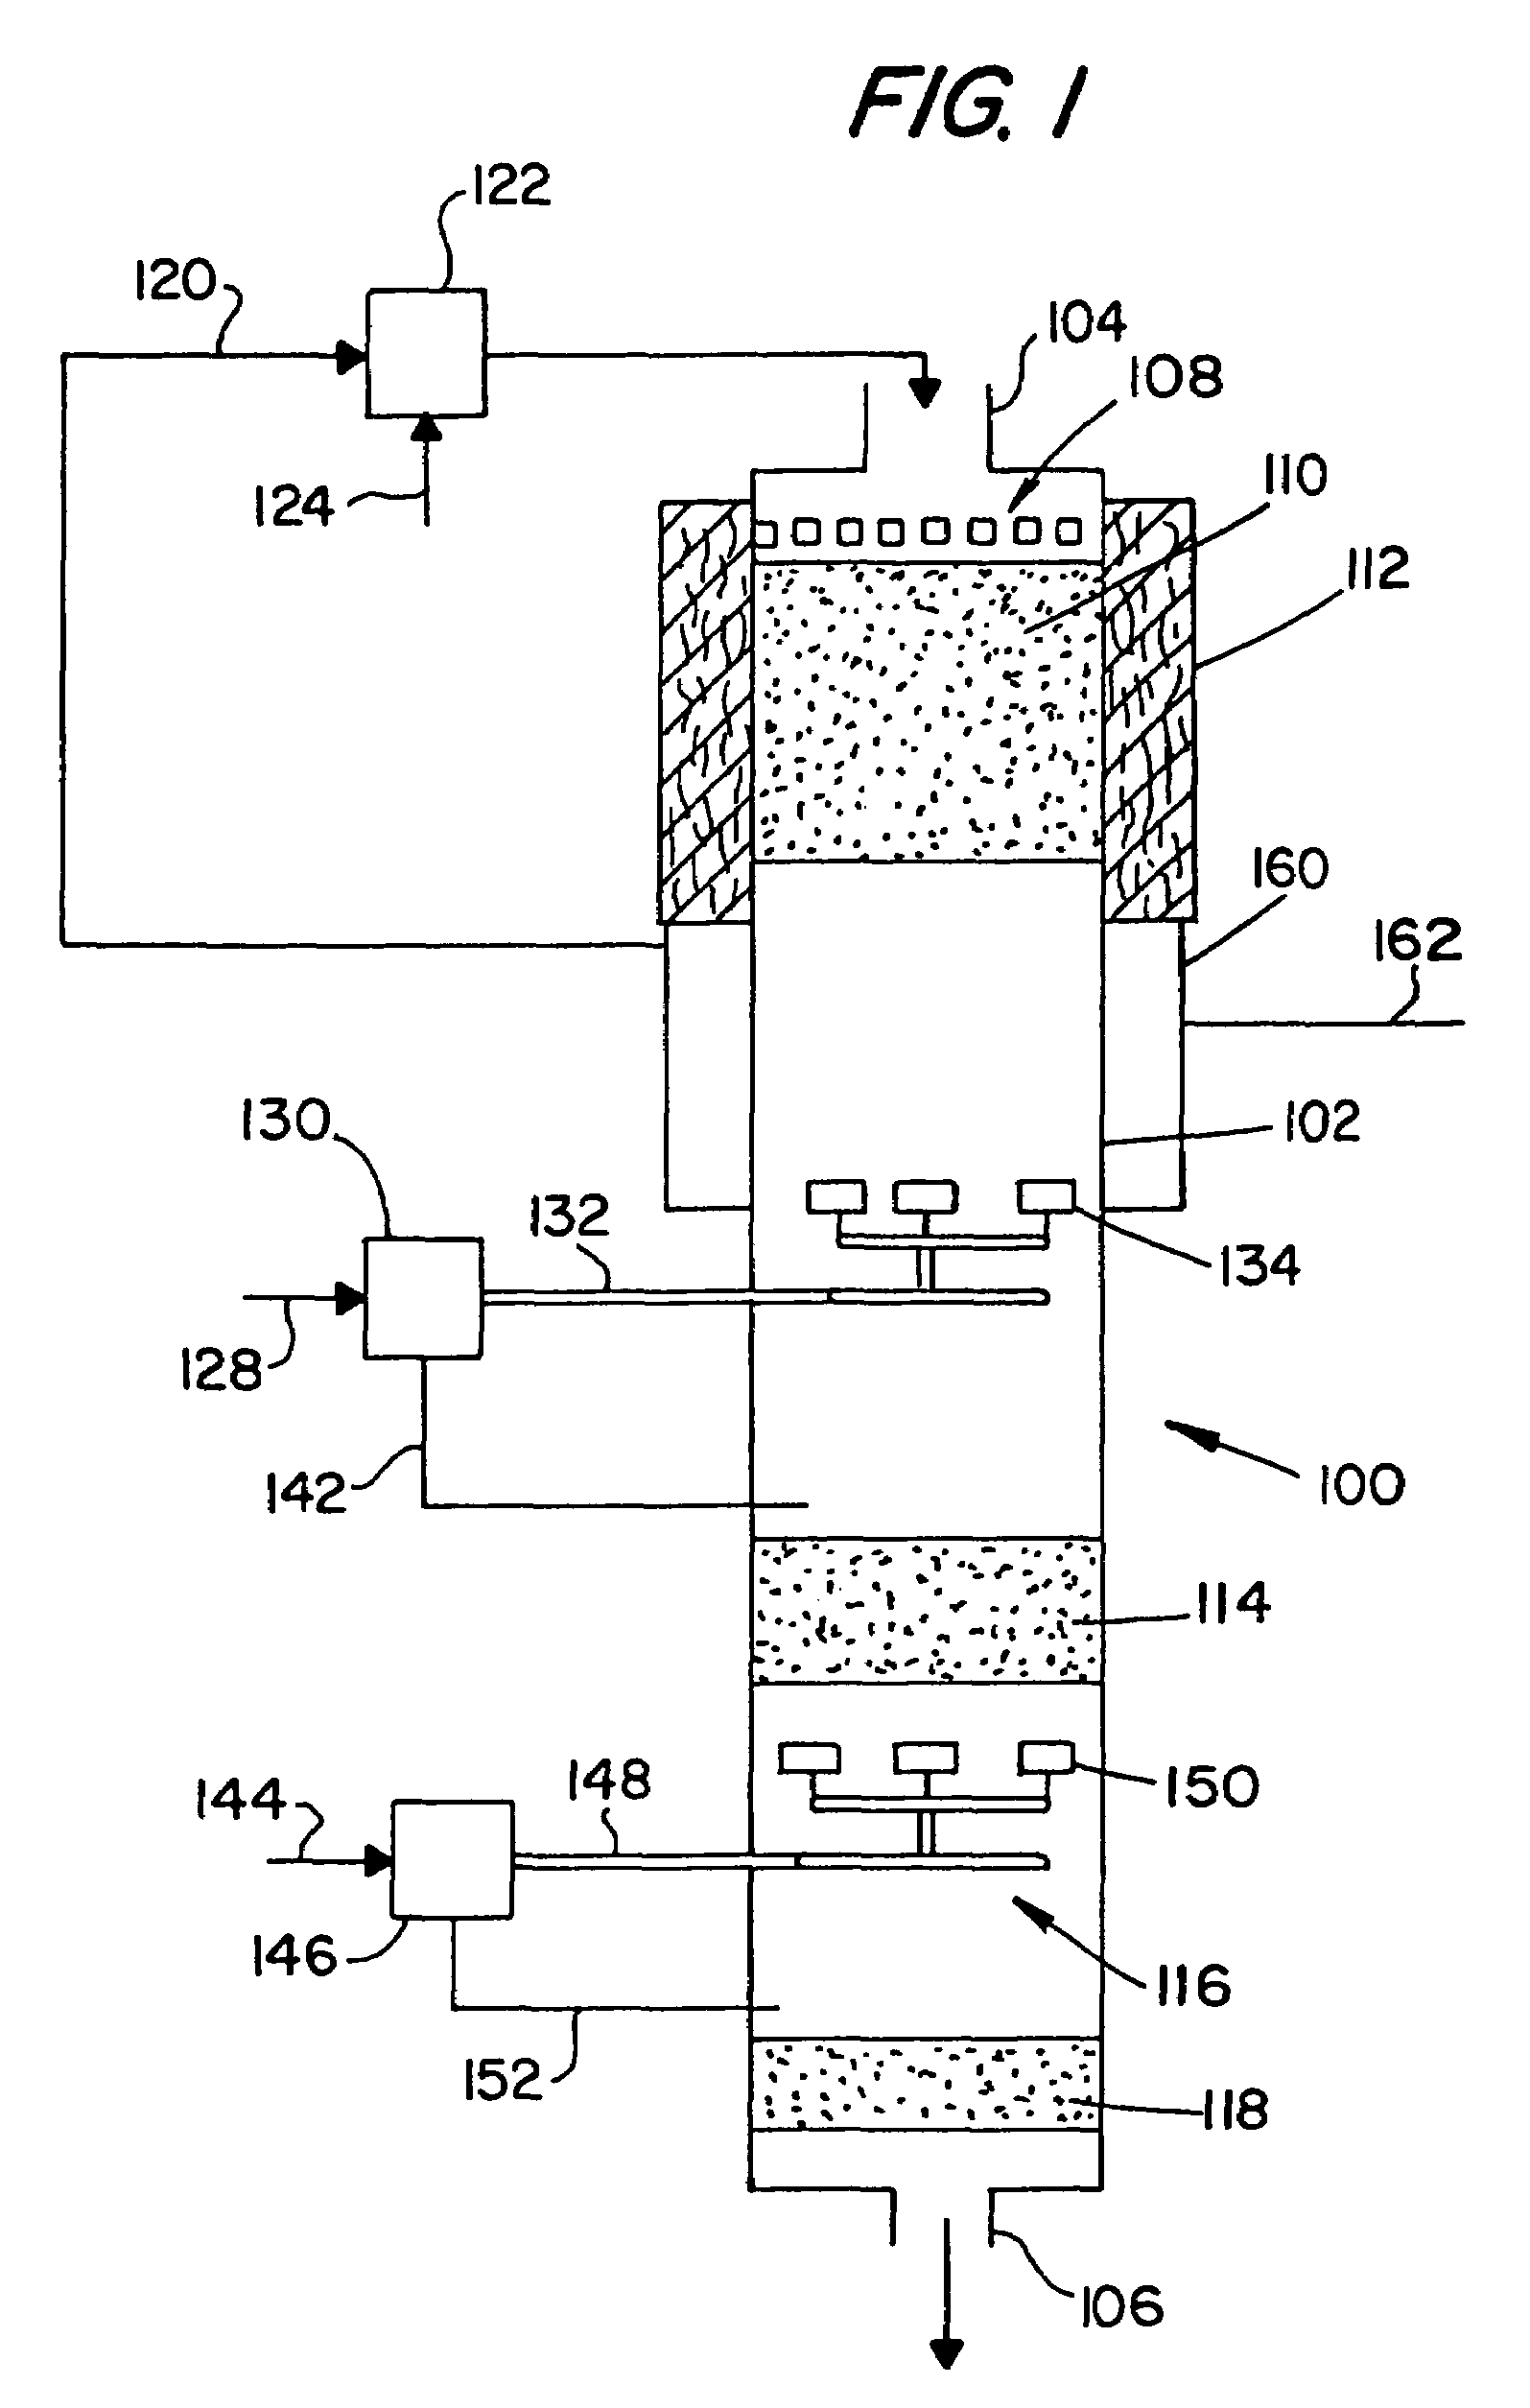 Compact reformer and water gas shift reactor for producing varying amounts of hydrogen